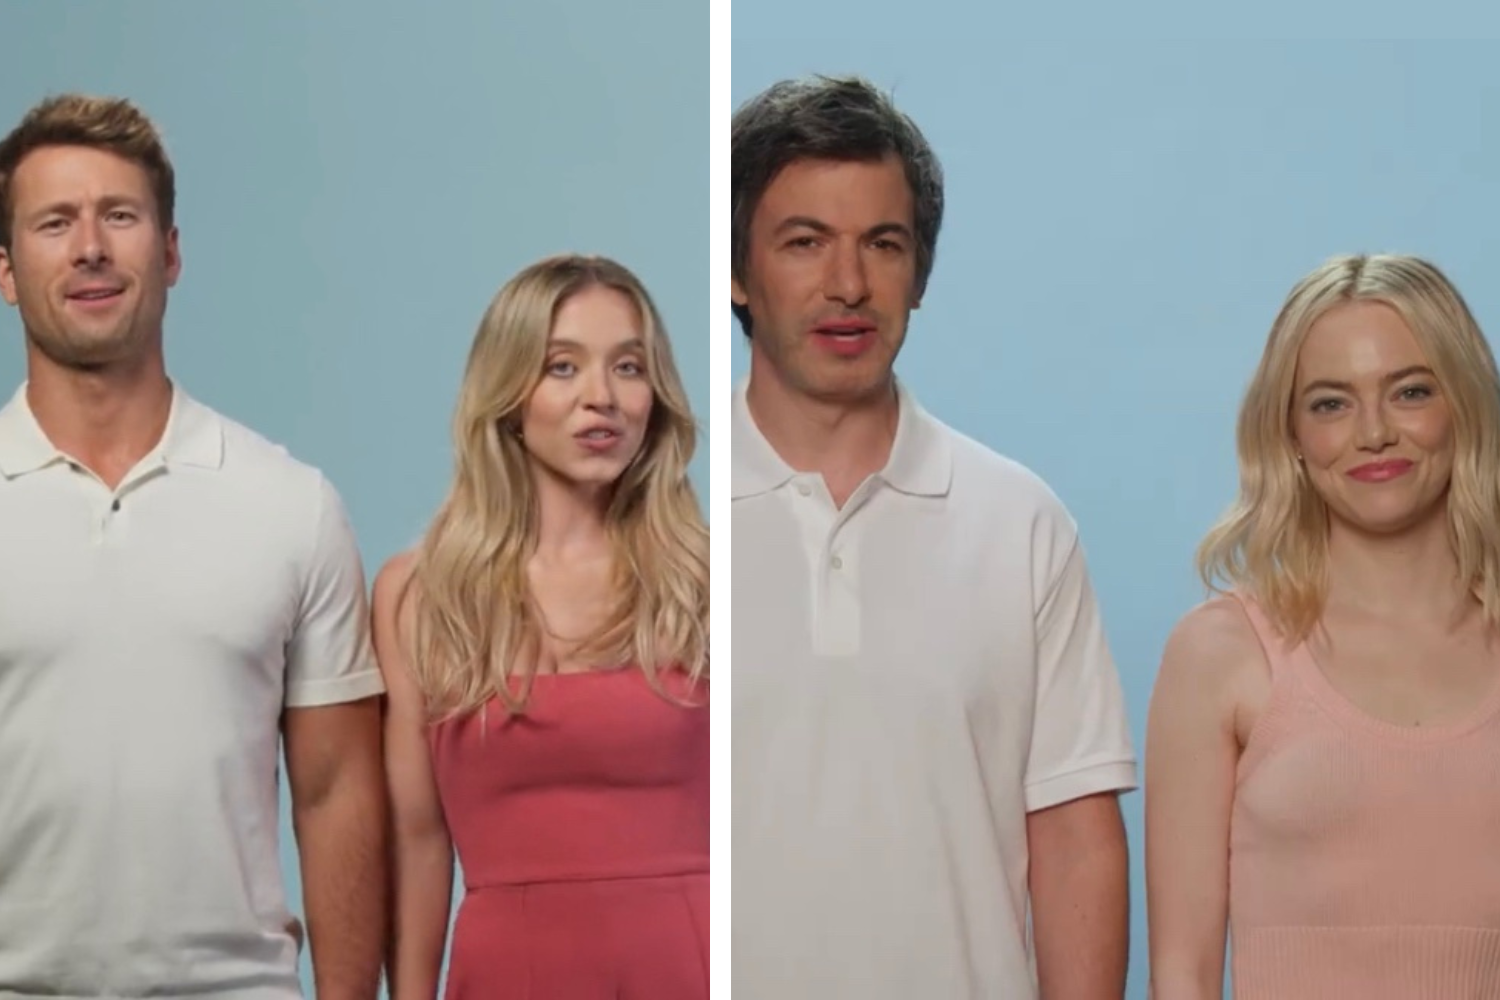 A still from a promo video for Anyone But You with actors Glen Powell and Sydney Sweeney next to a still from a similar-looking parody video from Nathan Fielder and Emma Stone